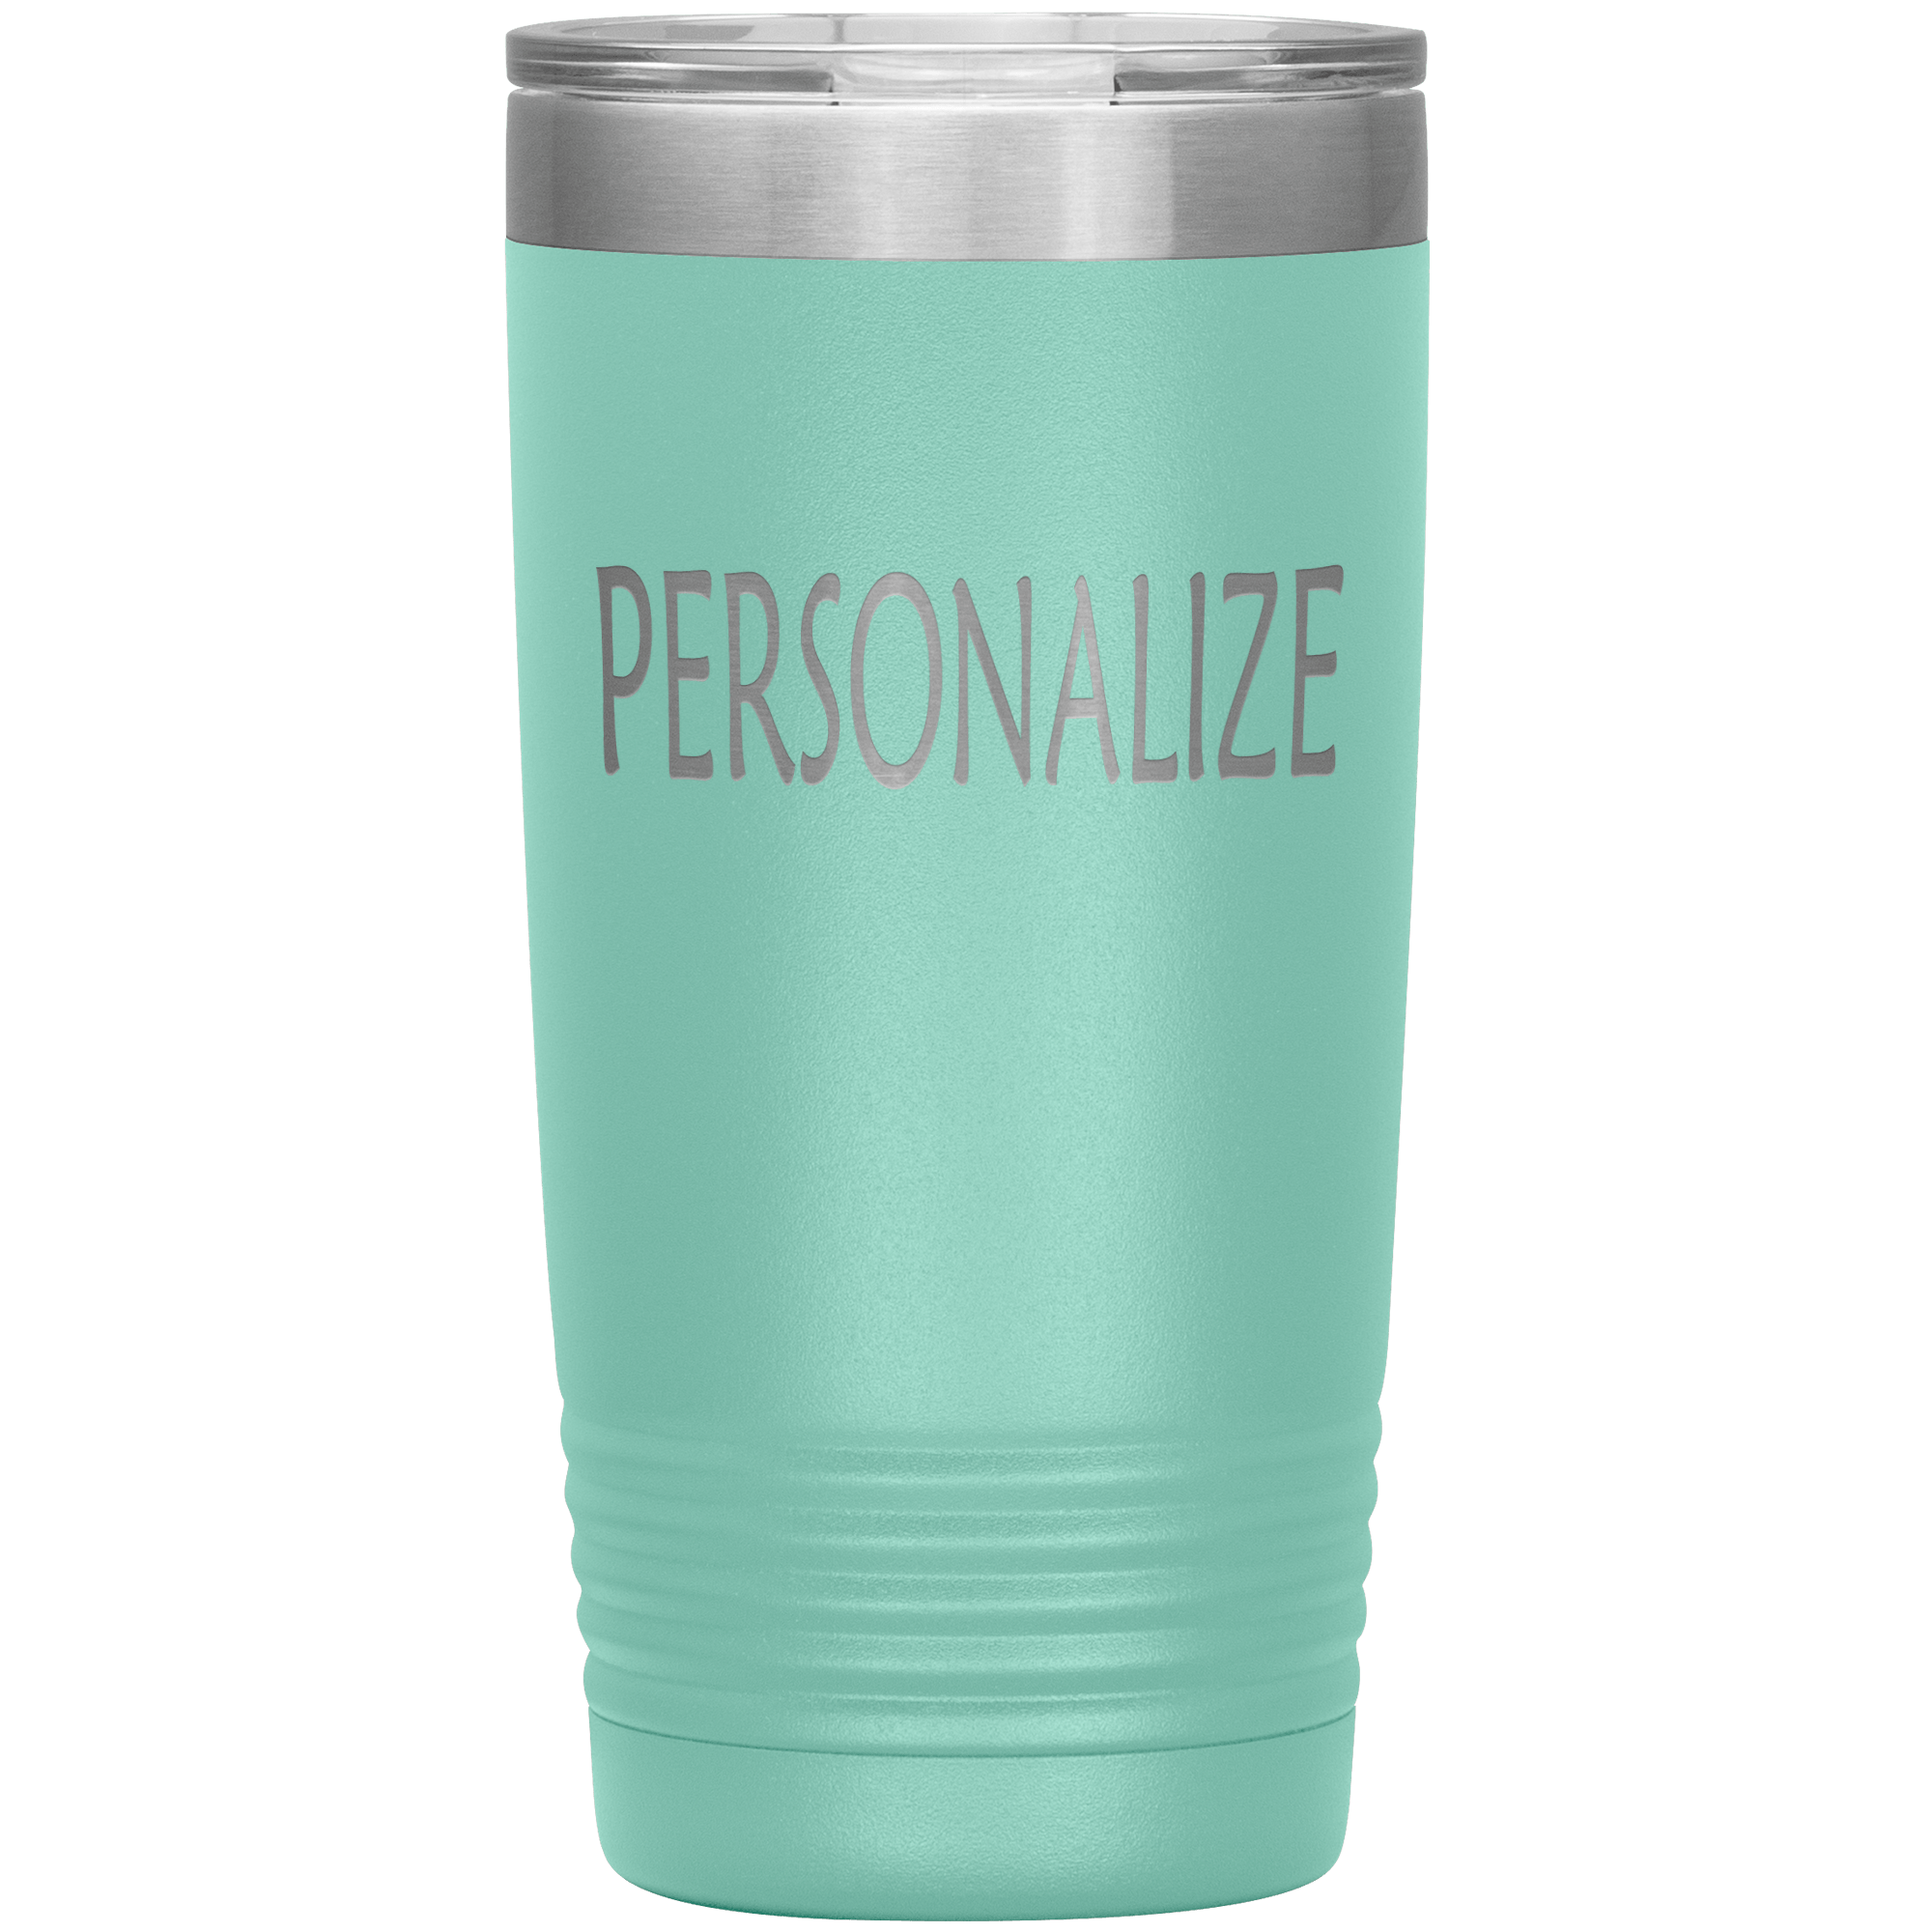 "Personalized or Customize your Tumbler"